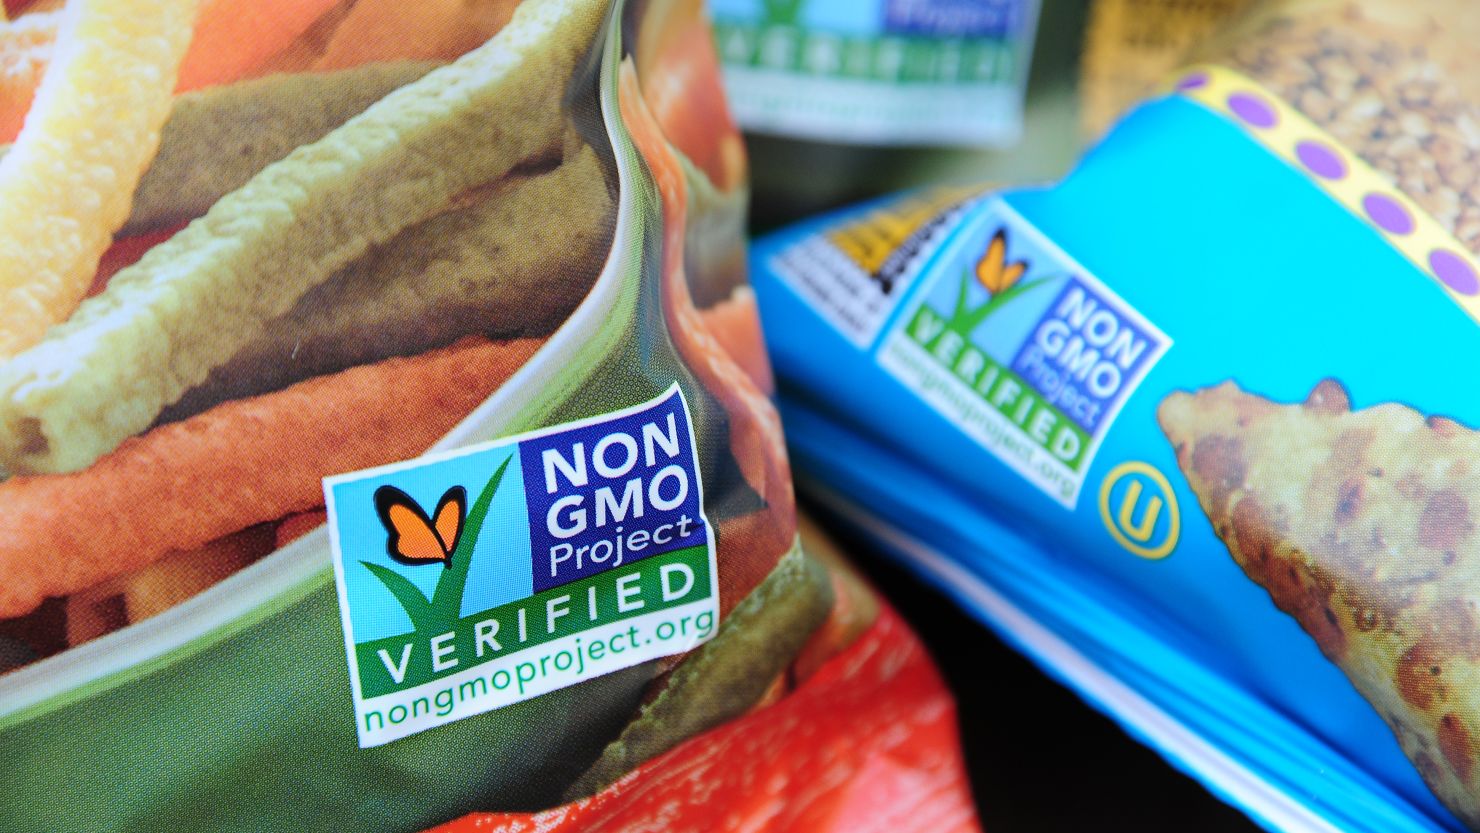 Labels show that snack foods don't contain GMOs. Washington state voters appear to have rejected labeling on GMO foods.